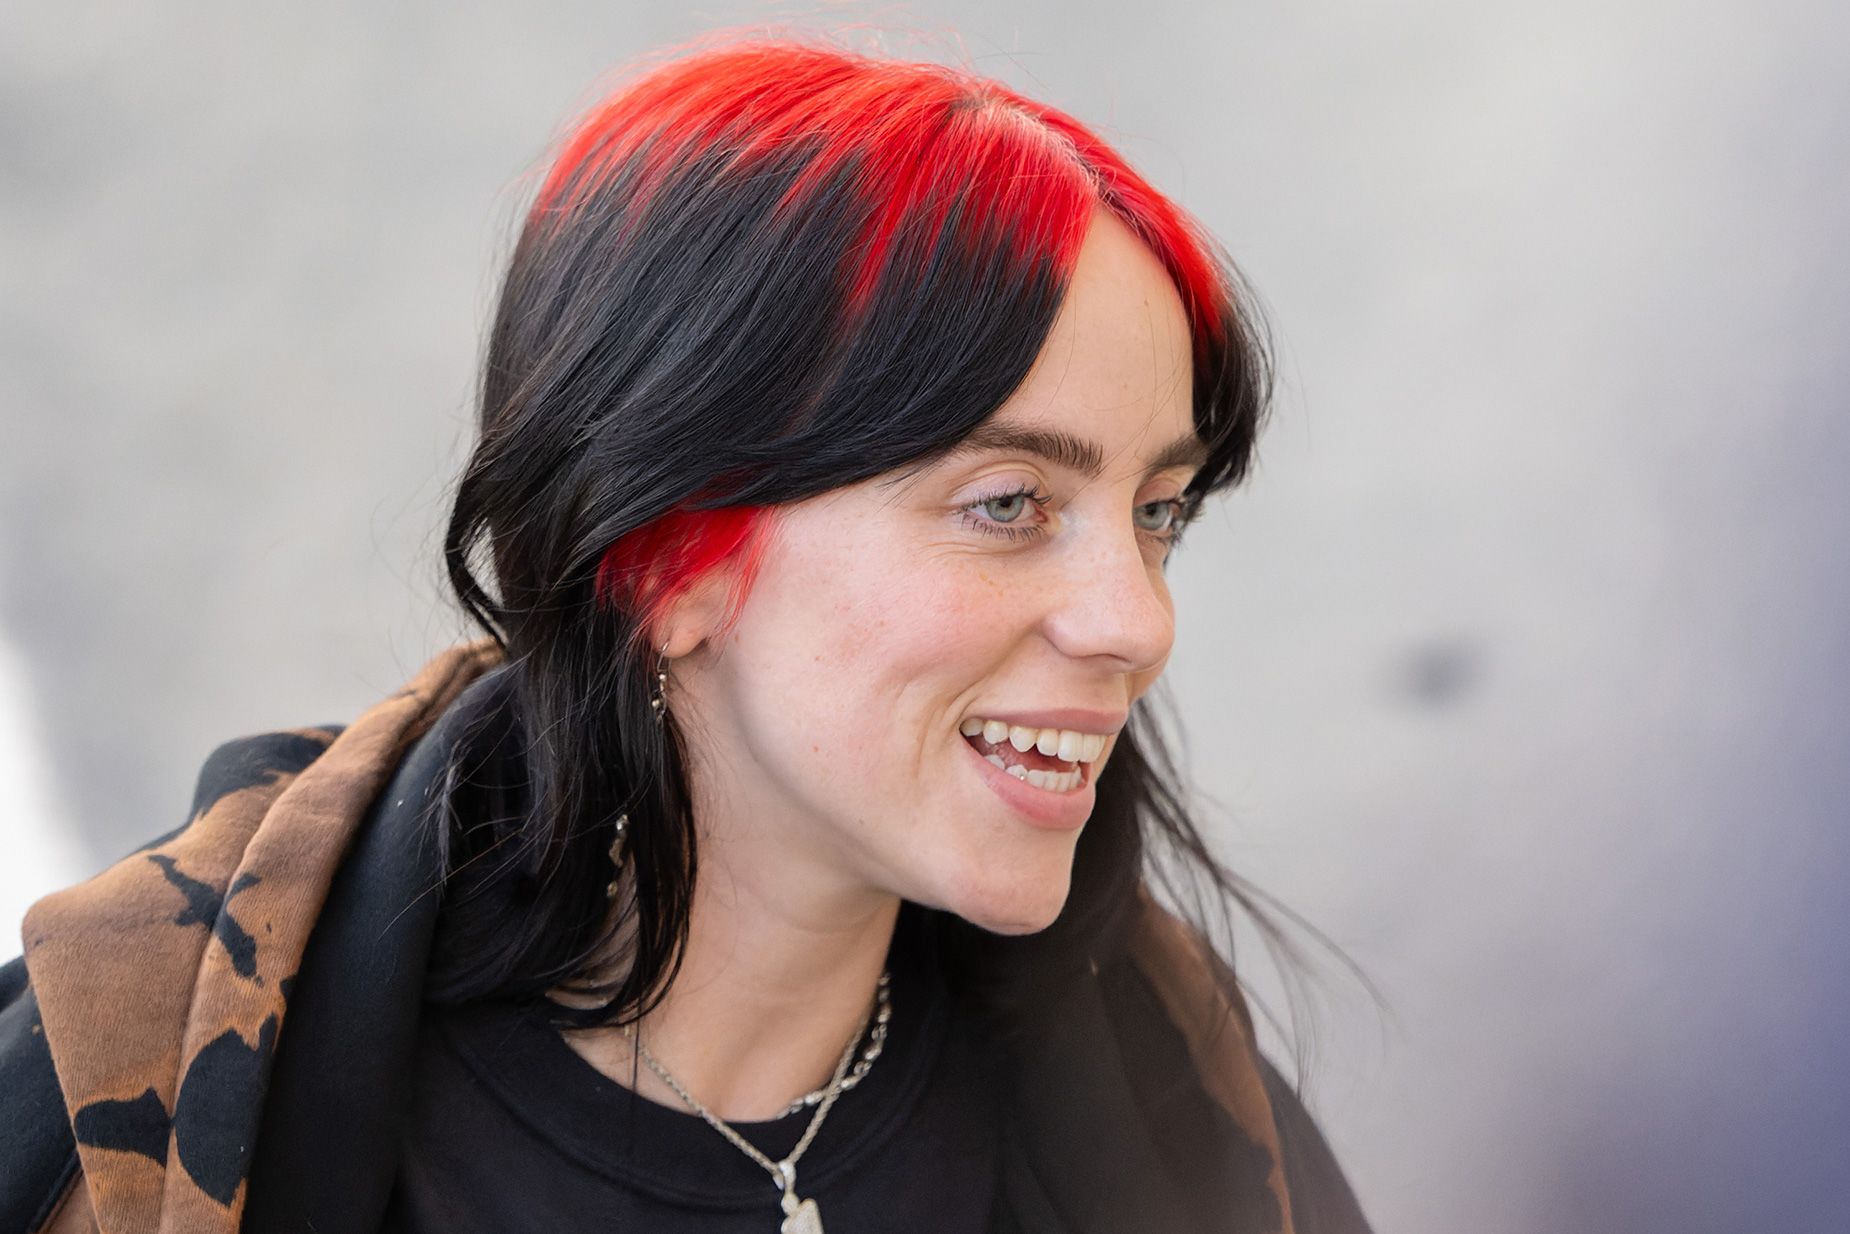 Billie Eilish, too, is another A-lister whose hair is strikingly scarlet.